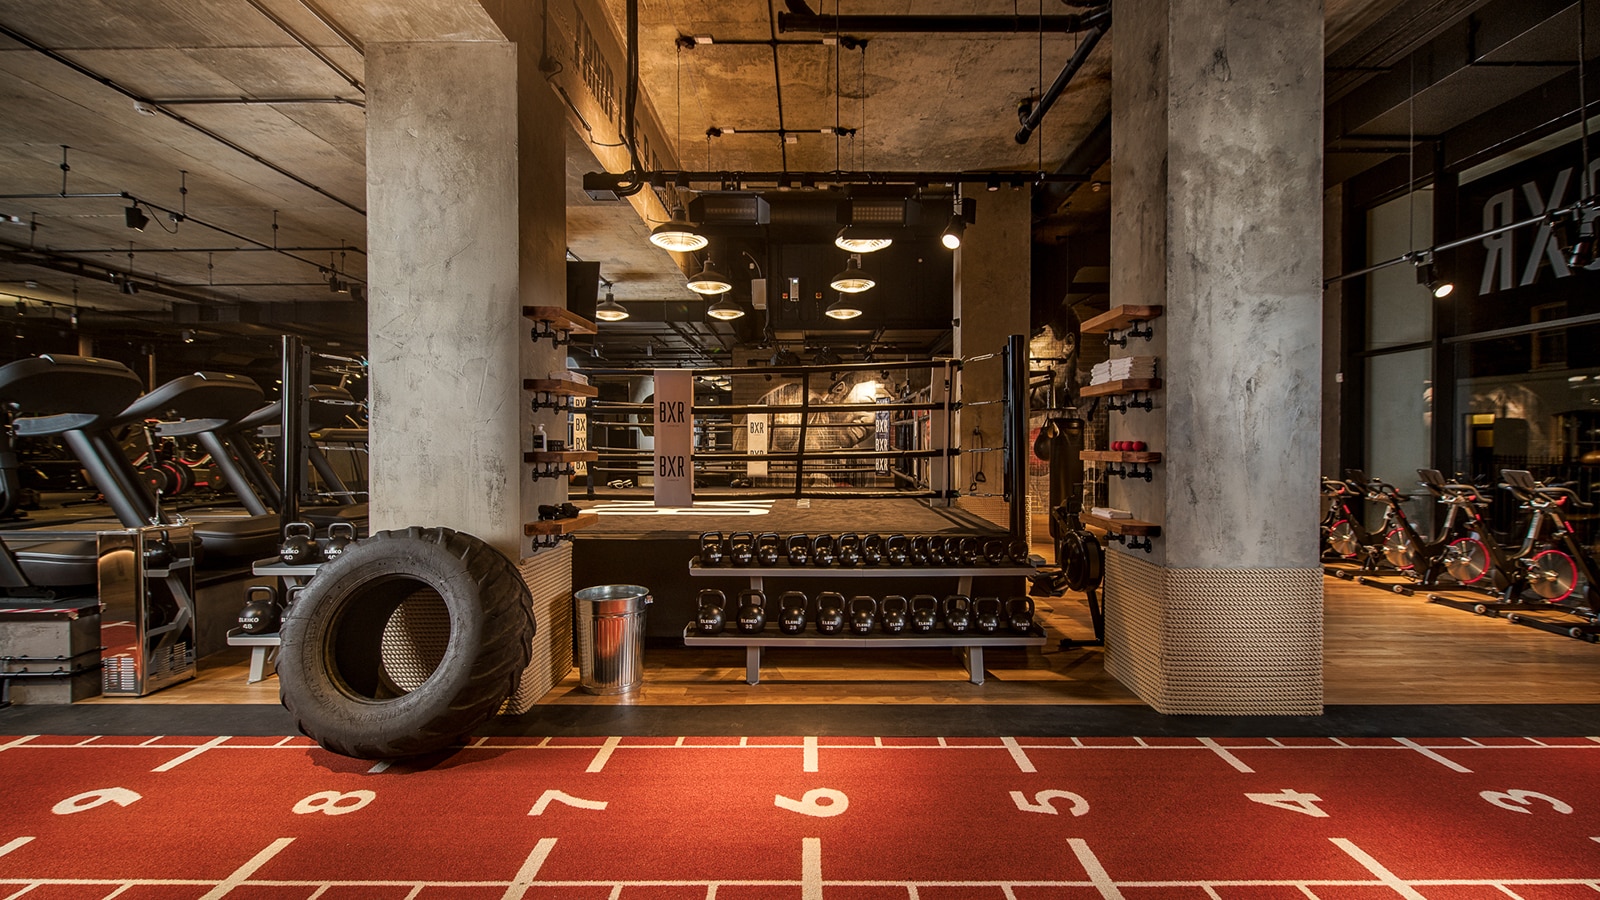 The World's Most Instagrammable Gyms | The Journal | MR PORTER